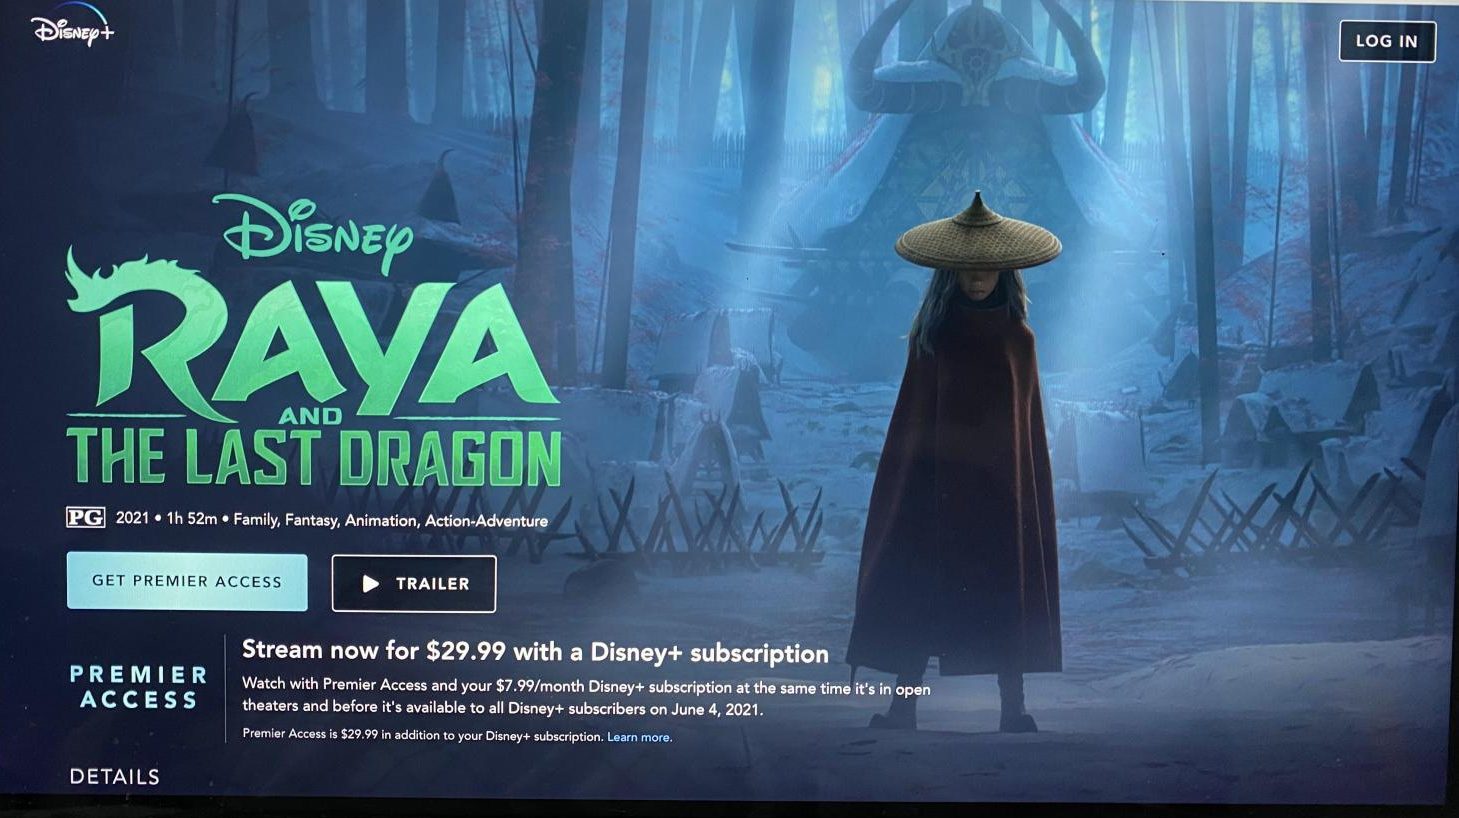 Raya and the Last Dragon: A Review of Disney's Latest Animated